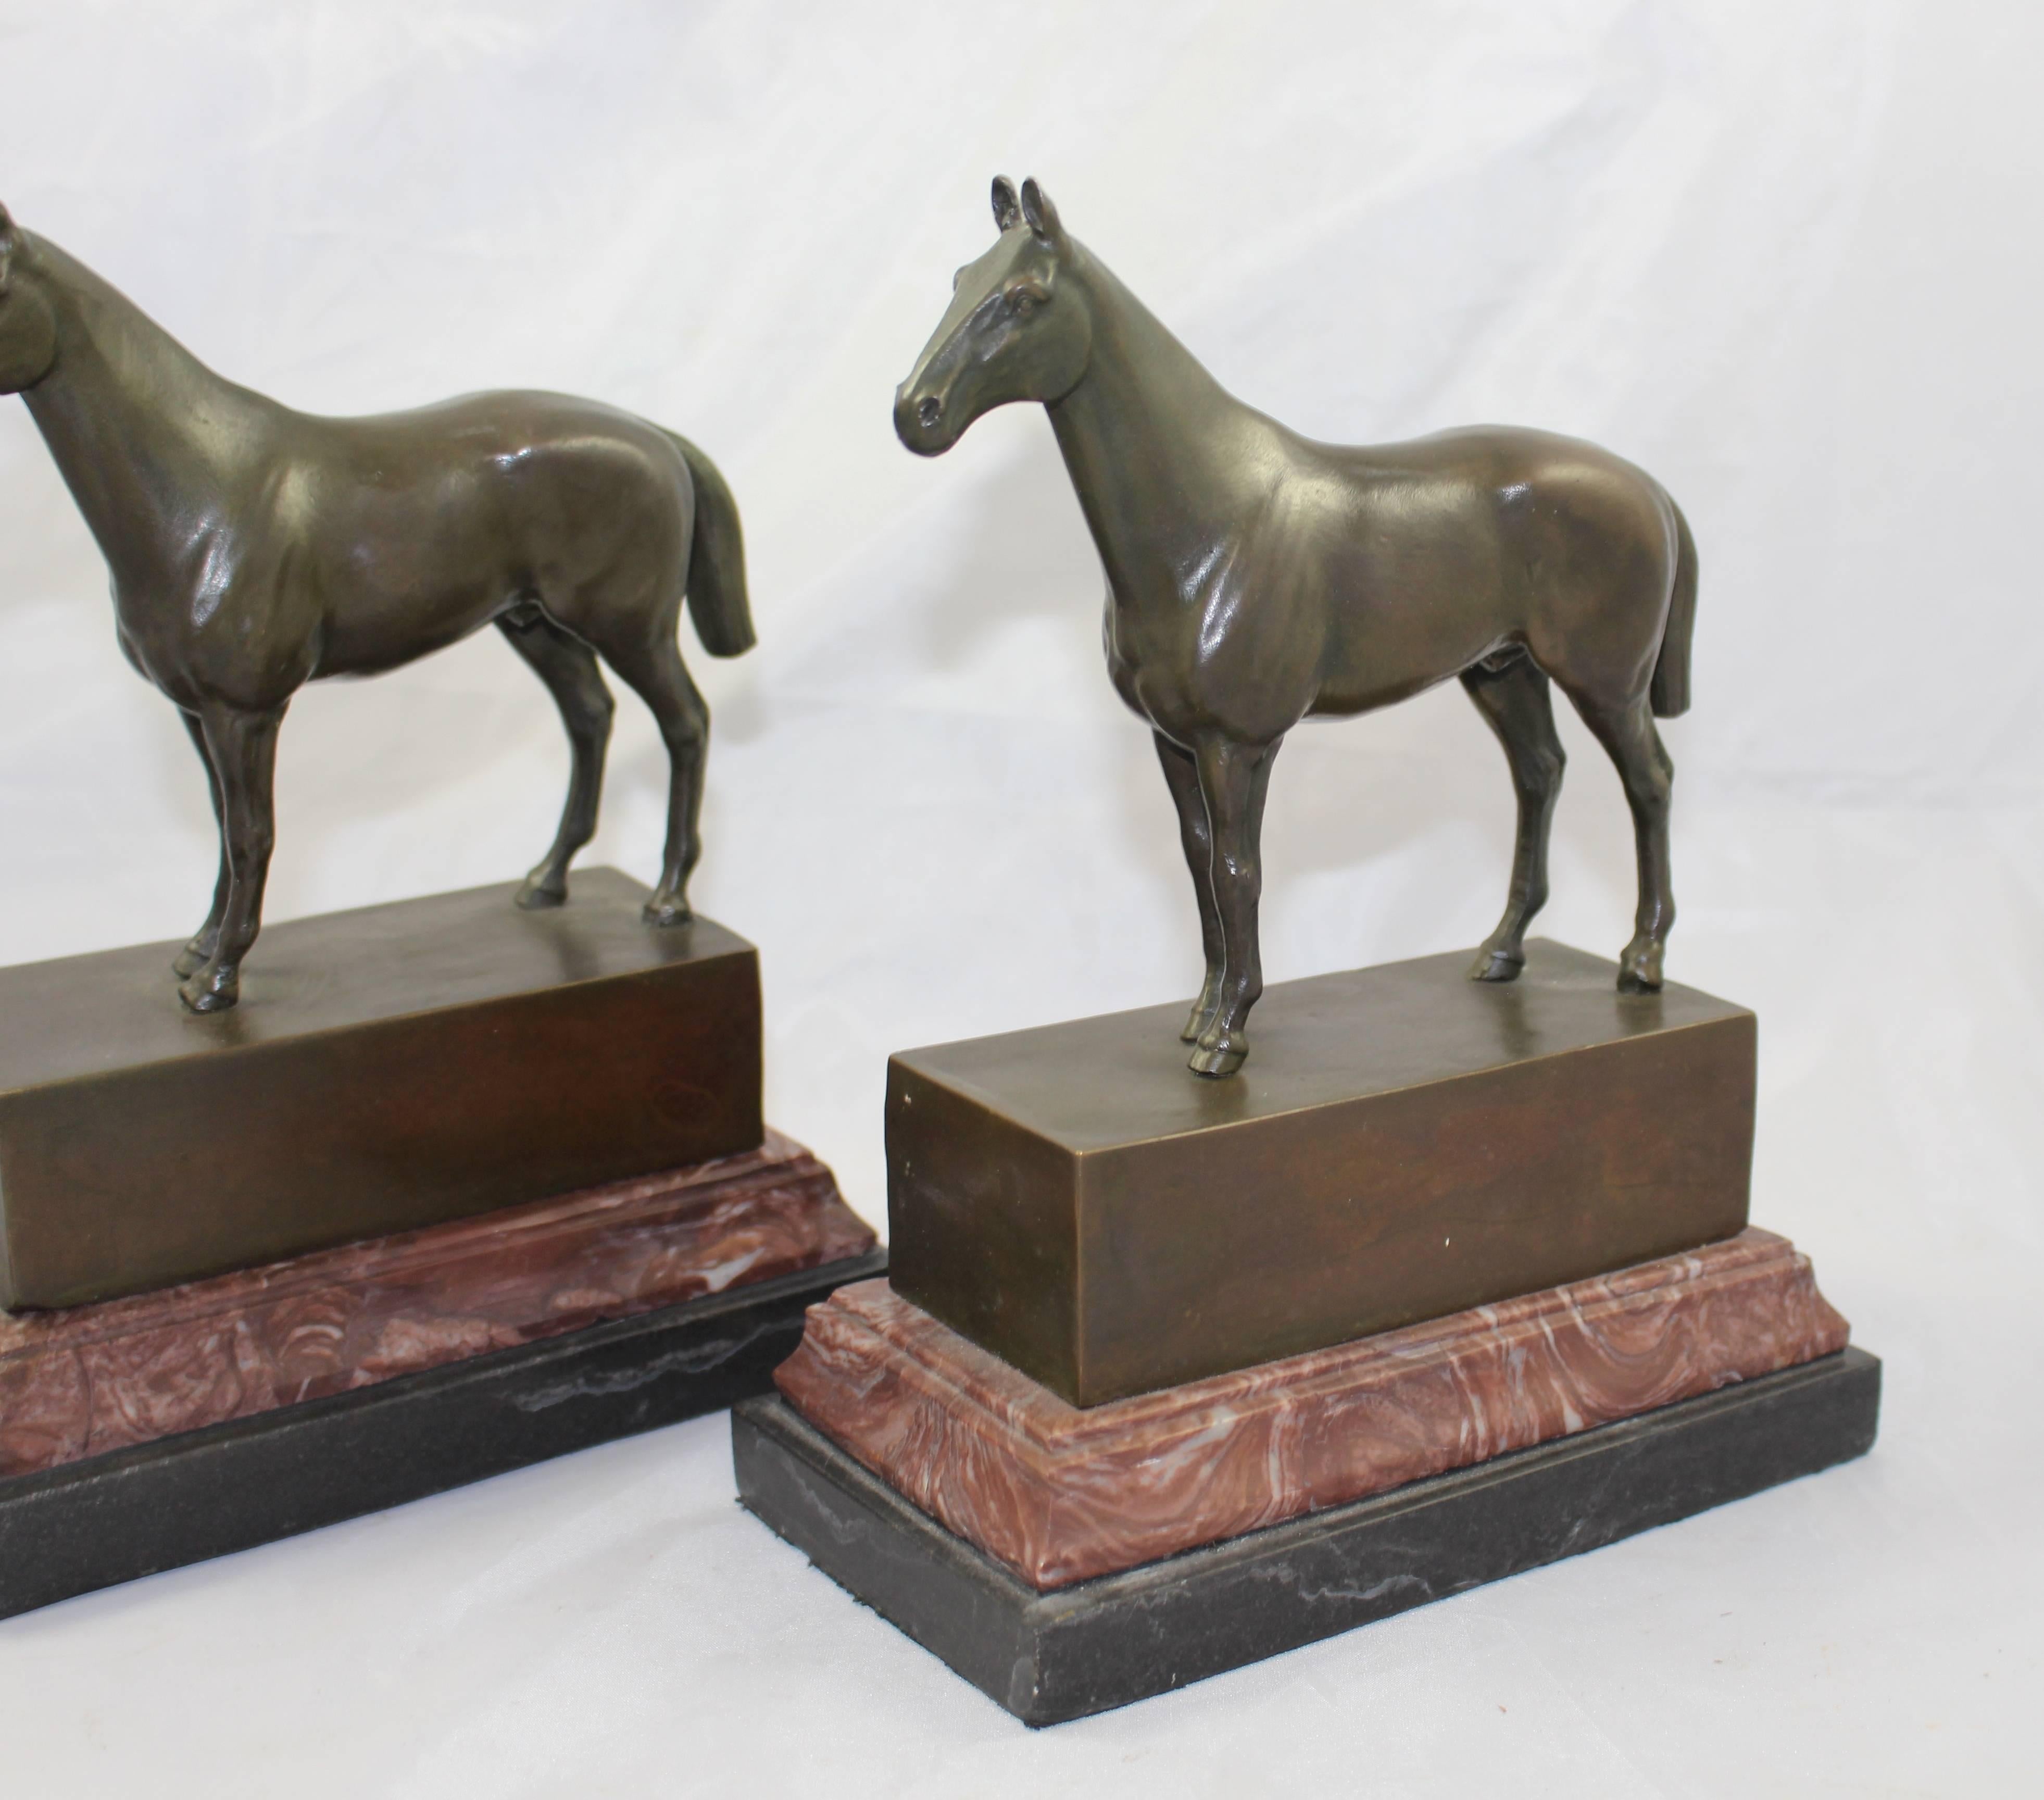 Subject horses.
Composition marble on bronze base.
Width 17.5 cm / 7 in.
Depth 9.5 cm / 3 3/4 in.
Height 22 cm / 8 1/2 in.
Condition very good condition commensurate with age.

Quality bronze bookends.

Free UK mainland delivery.

Please